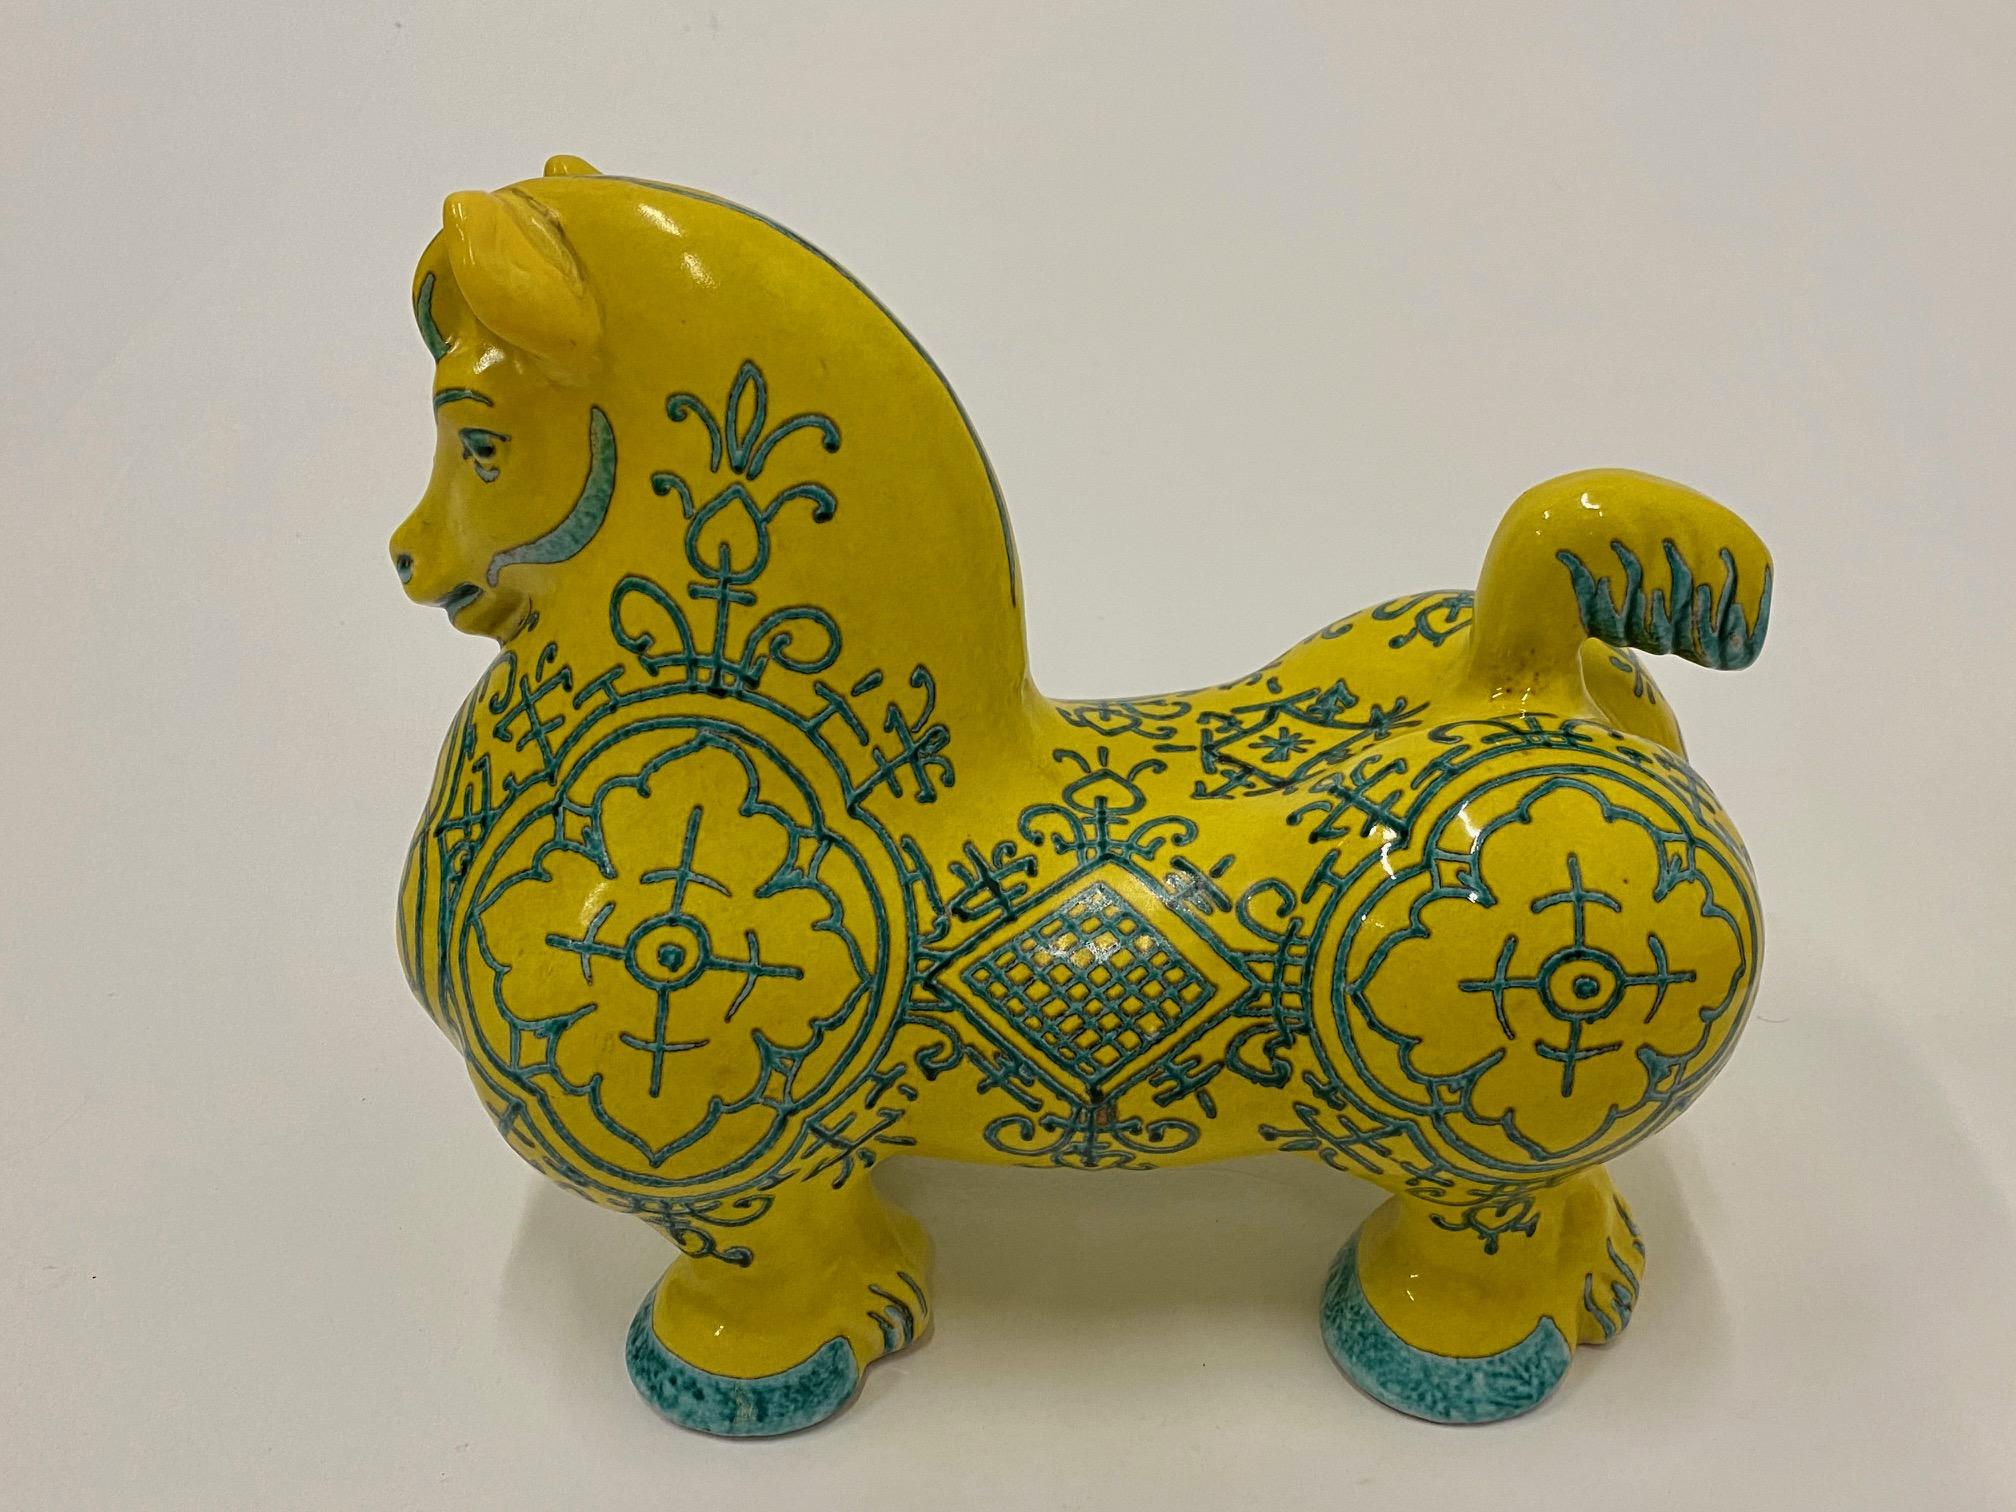 Delightful bright yellow Italian ceramic horse sculpture having painted decoration in contrasting teal.